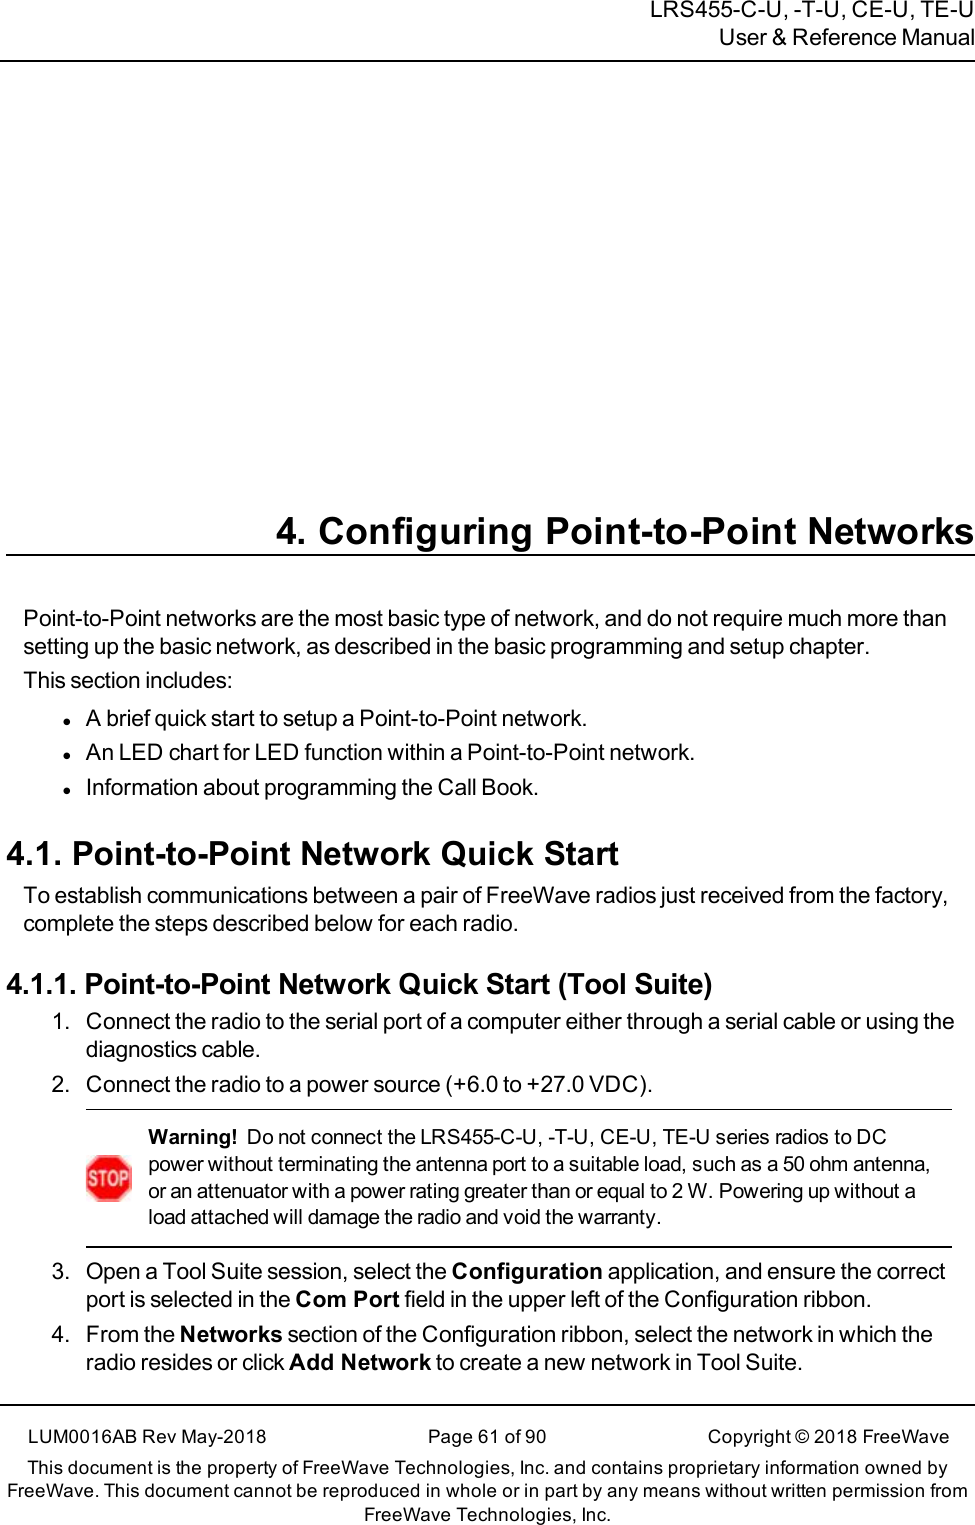 LRS455-C-U, -T-U, CE-U, TE-UUser &amp; Reference Manual4. Configuring Point-to-Point NetworksPoint-to-Point networks are the most basic type of network, and do not require much more thansetting up the basic network, as described in the basic programming and setup chapter.This section includes:lA brief quick start to setup a Point-to-Point network.lAn LED chart for LED function within a Point-to-Point network.lInformation about programming the Call Book.4.1. Point-to-Point Network Quick StartTo establish communications between a pair of FreeWave radios just received from the factory,complete the steps described below for each radio.4.1.1. Point-to-Point Network Quick Start (Tool Suite)1. Connect the radio to the serial port of a computer either through a serial cable or using thediagnostics cable.2. Connect the radio to a power source (+6.0 to +27.0 VDC).Warning! Do not connect the LRS455-C-U, -T-U, CE-U, TE-U series radios to DCpower without terminating the antenna port to a suitable load, such as a 50 ohm antenna,or an attenuator with a power rating greater than or equal to 2 W. Powering up without aload attached will damage the radio and void the warranty.3. Open a Tool Suite session, select the Configuration application, and ensure the correctport is selected in the Com Port field in the upper left of the Configuration ribbon.4. From the Networks section of the Configuration ribbon, select the network in which theradio resides or click Add Network to create a new network in Tool Suite.LUM0016AB Rev May-2018 Page 61 of 90 Copyright © 2018FreeWaveThis document is the property of FreeWave Technologies, Inc. and contains proprietary information owned byFreeWave. This document cannot be reproduced in whole or in part by any means without written permission fromFreeWave Technologies, Inc.